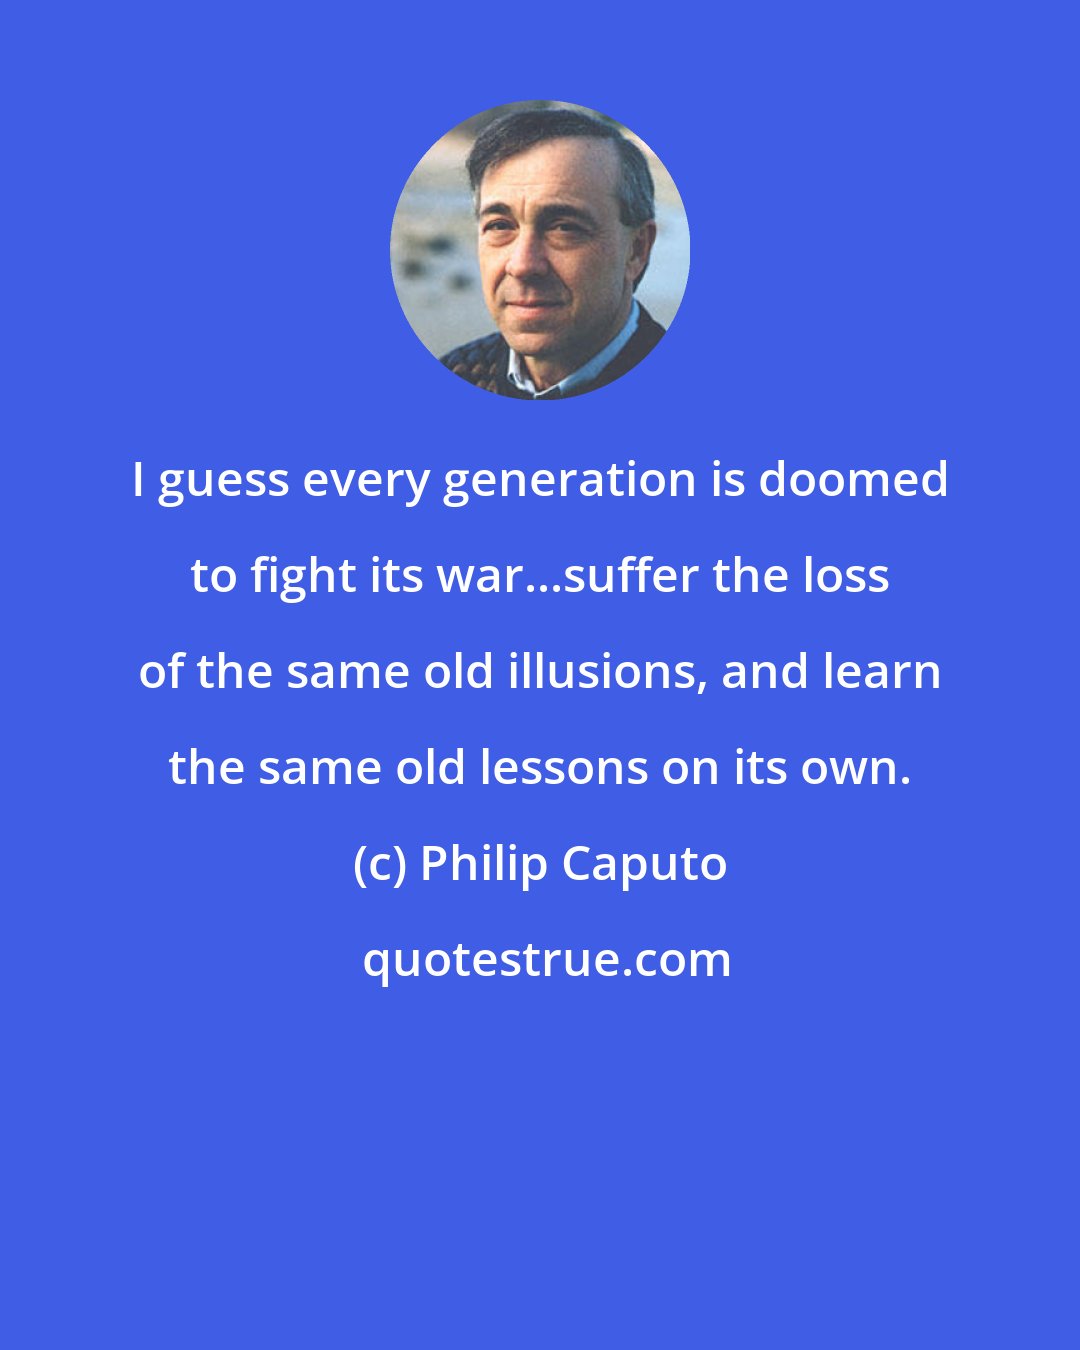 Philip Caputo: I guess every generation is doomed to fight its war...suffer the loss of the same old illusions, and learn the same old lessons on its own.